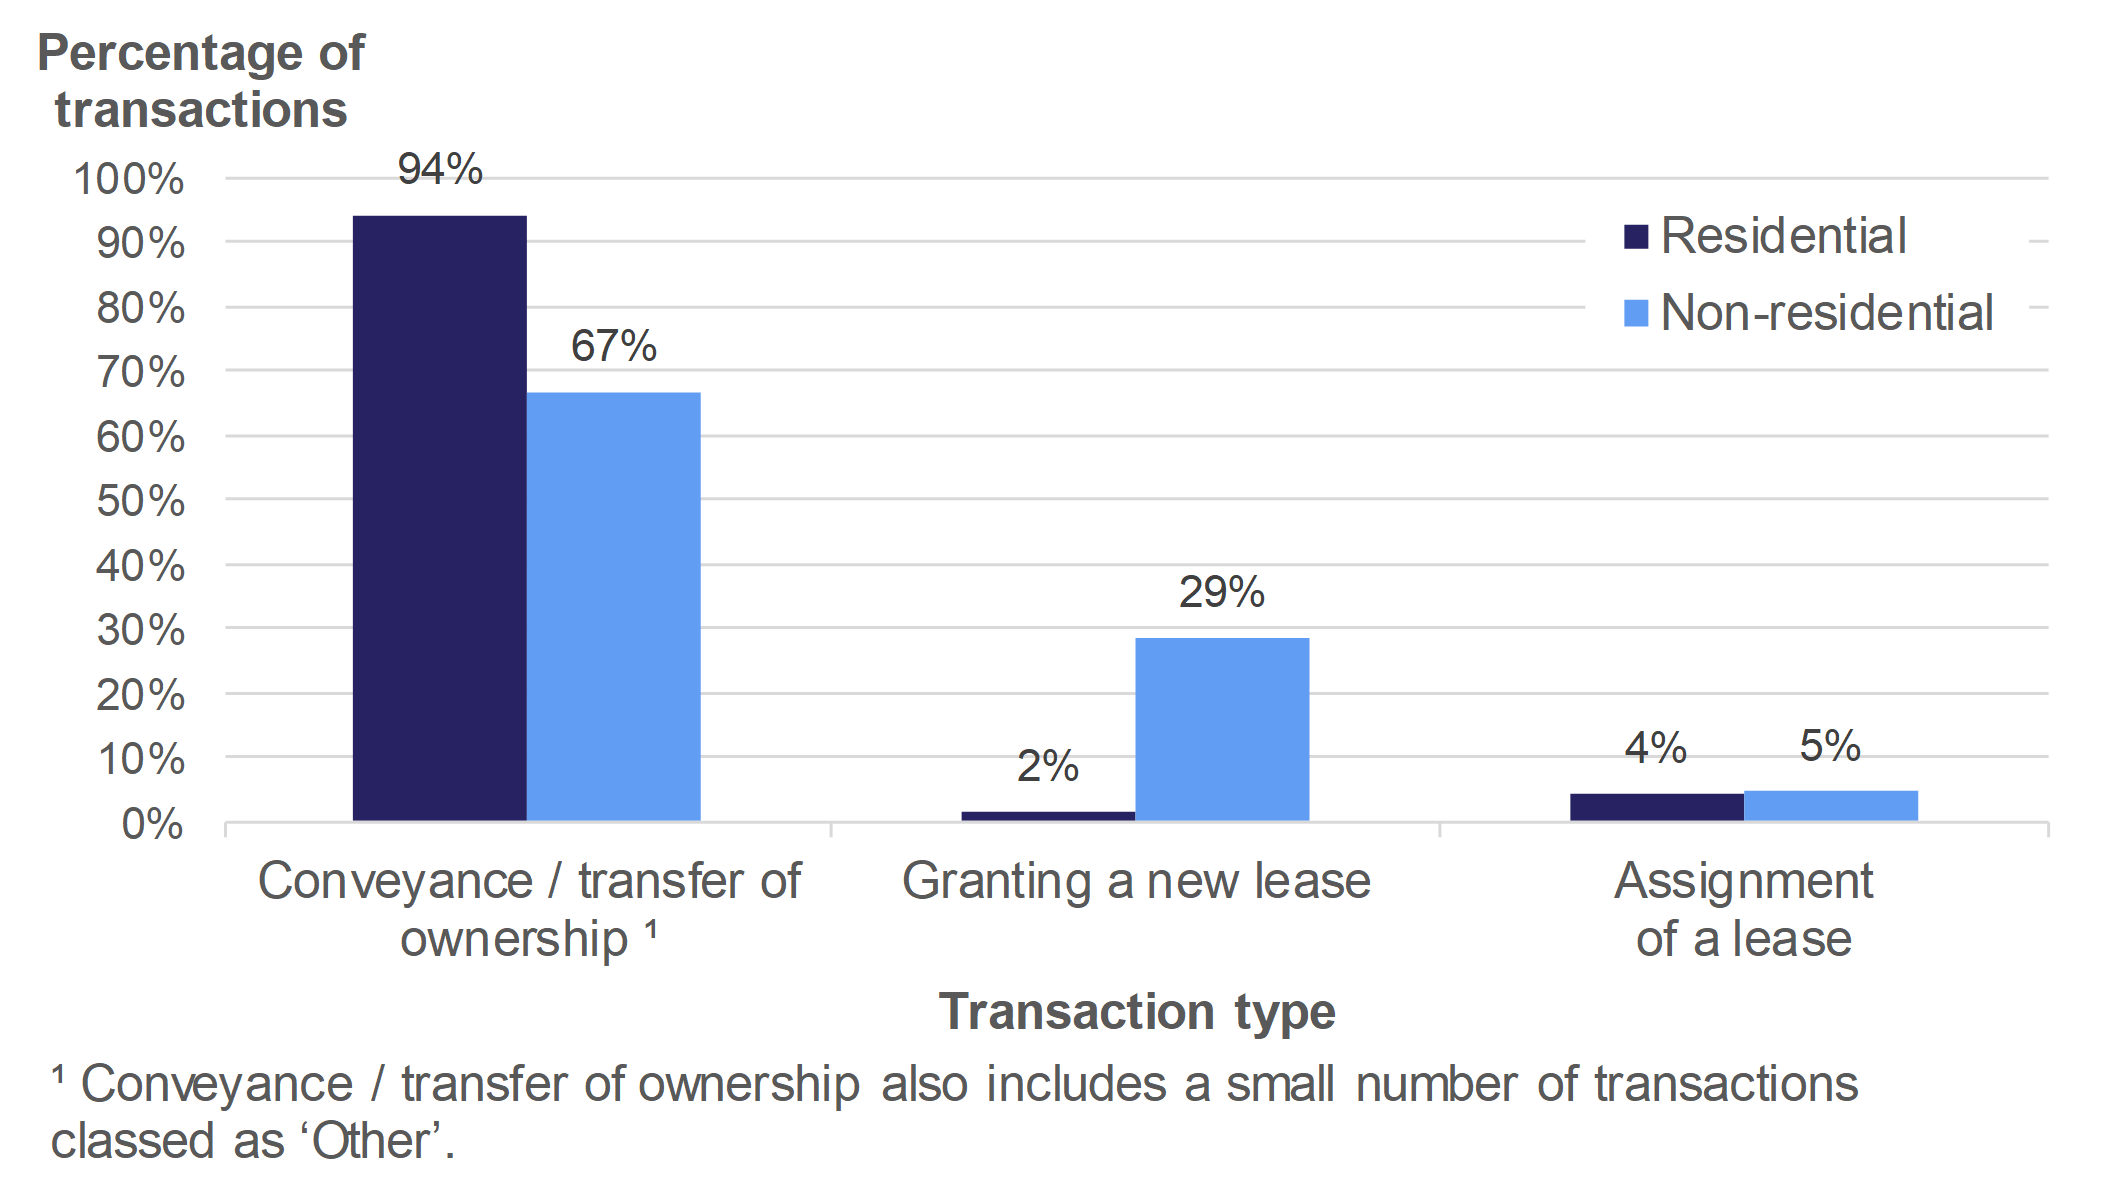 Figure 2.6 shows the percentage of transactions involving conveyance / transfer of ownership, granting of a new lease or assignment of a lease. Separate percentages are given for residential and non-residential transactions.